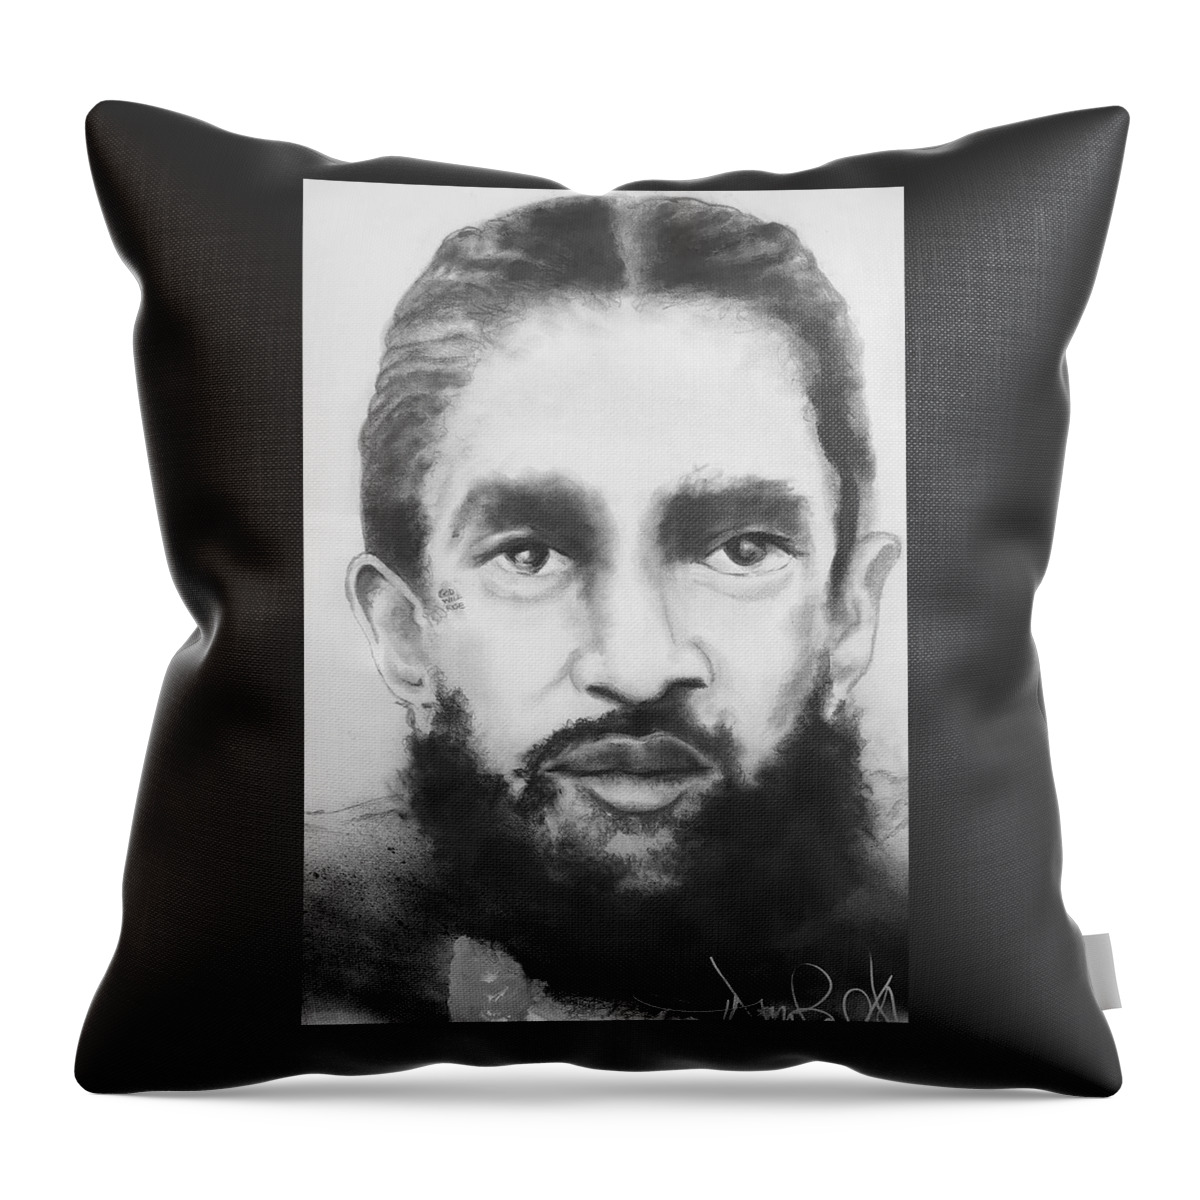  Throw Pillow featuring the drawing Nipsey by Angie ONeal